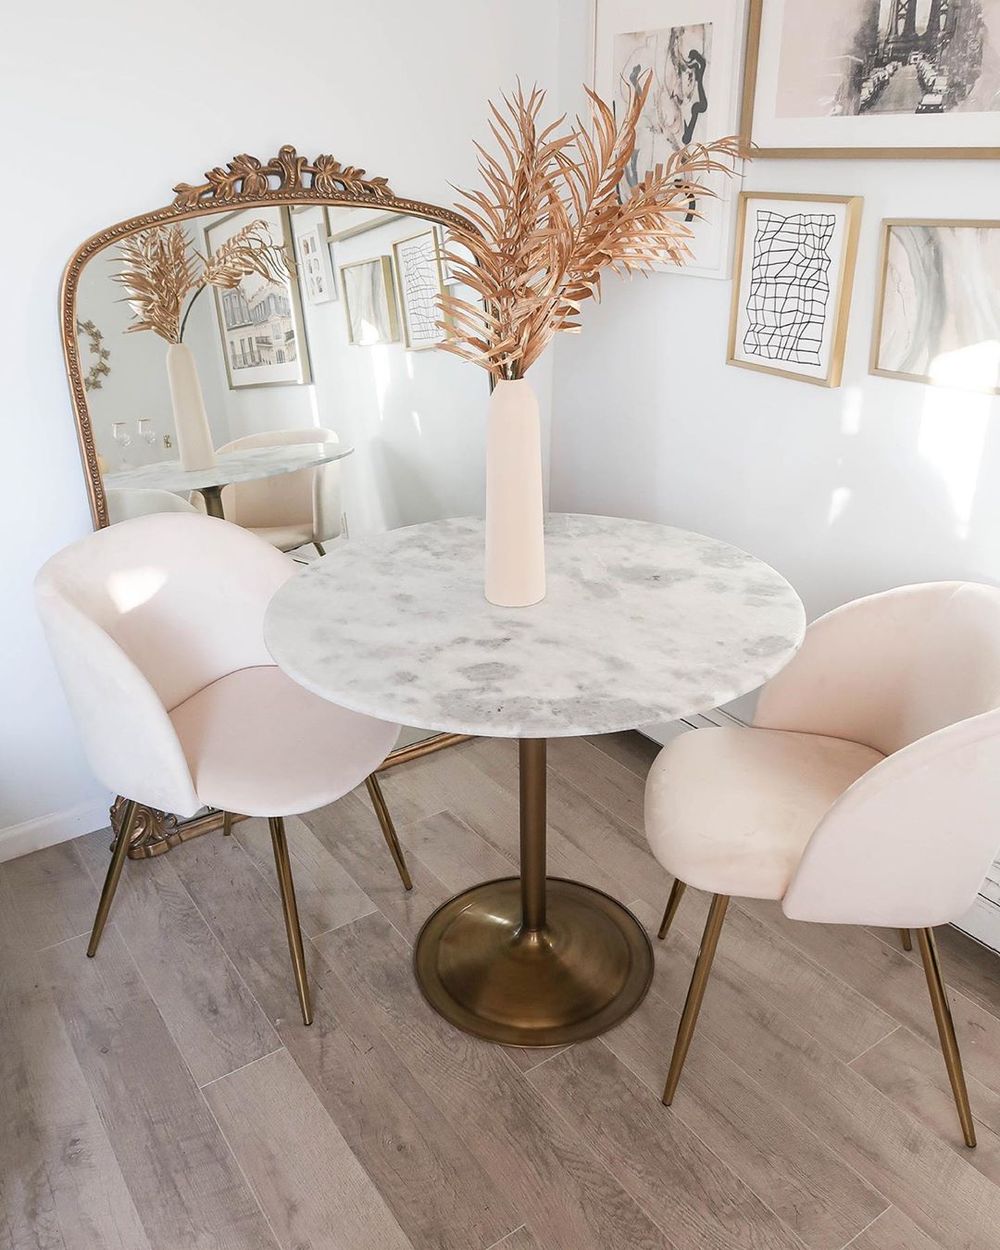 Glam Breakfast Nook with Gold Leaning Mirror via @teresalaucar